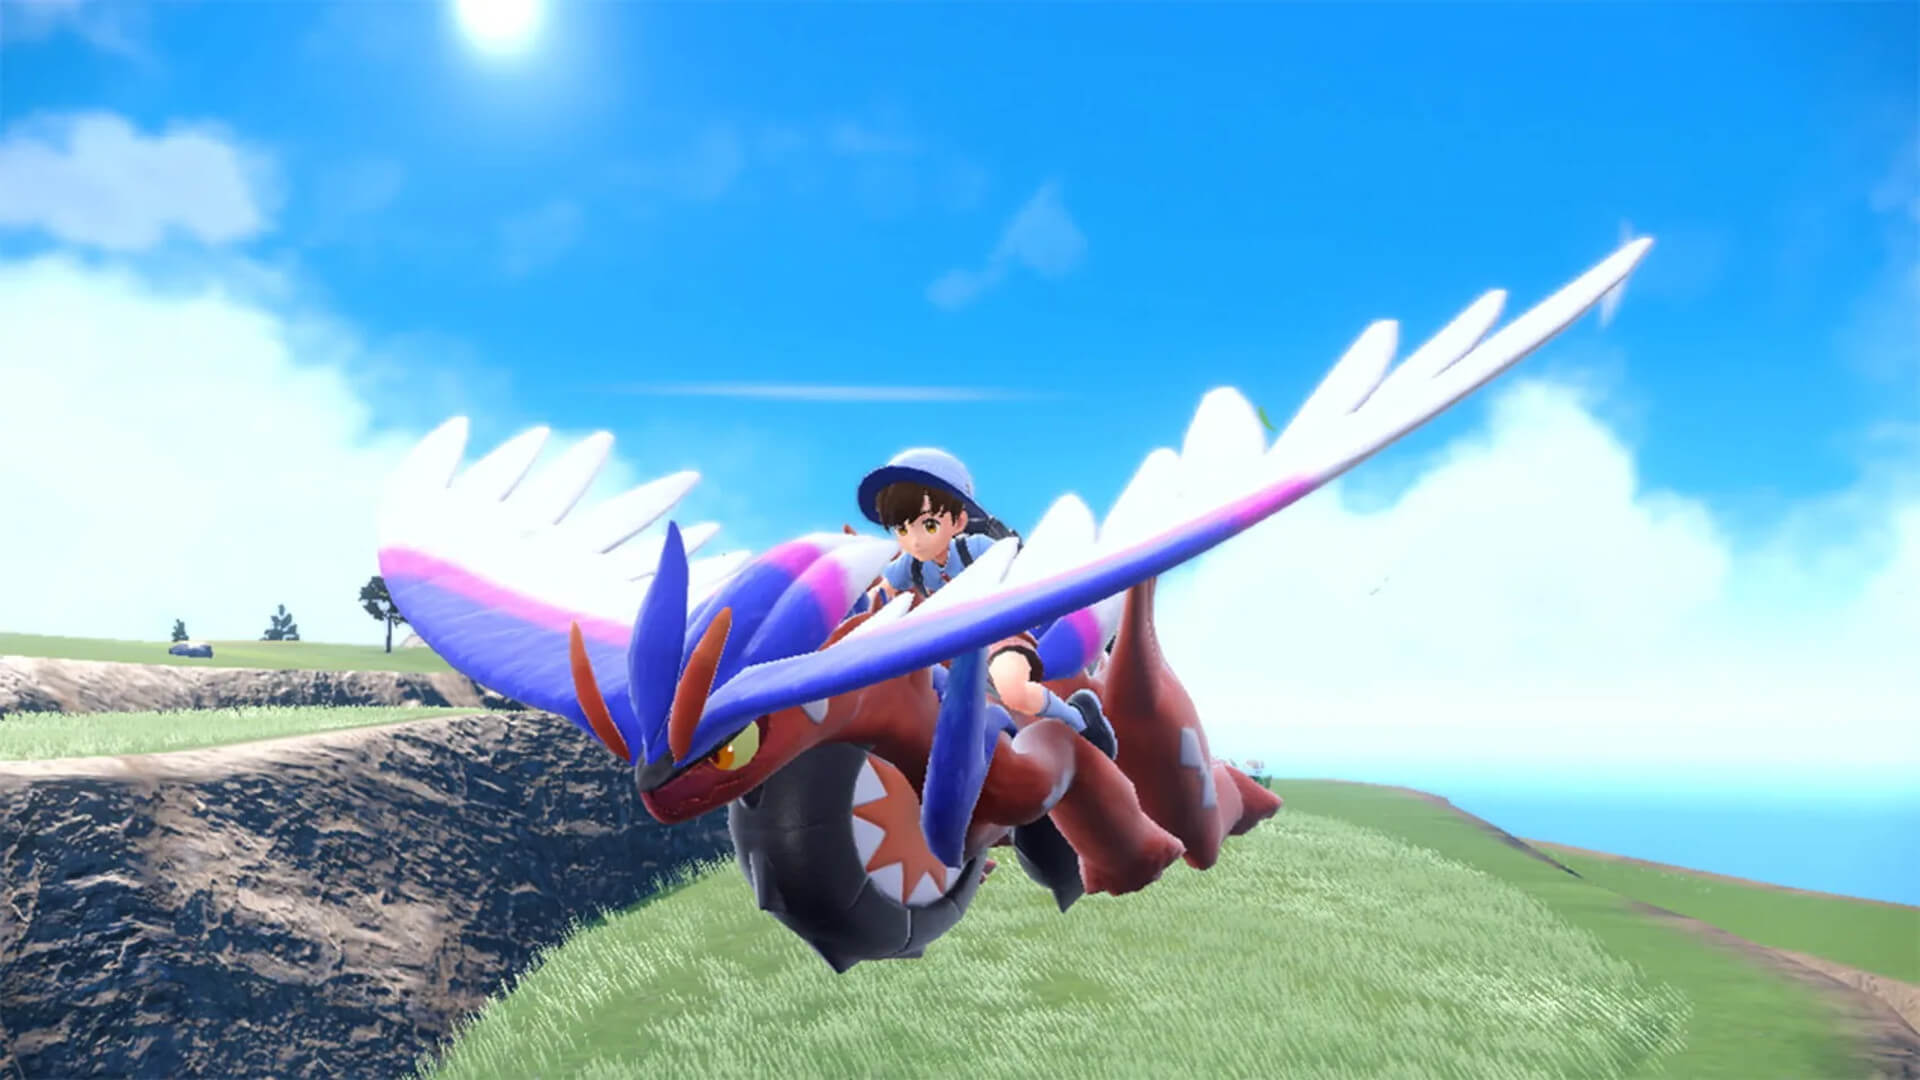 The player taking to the skies on Koraidon in Pokémon Scarlet and Violet